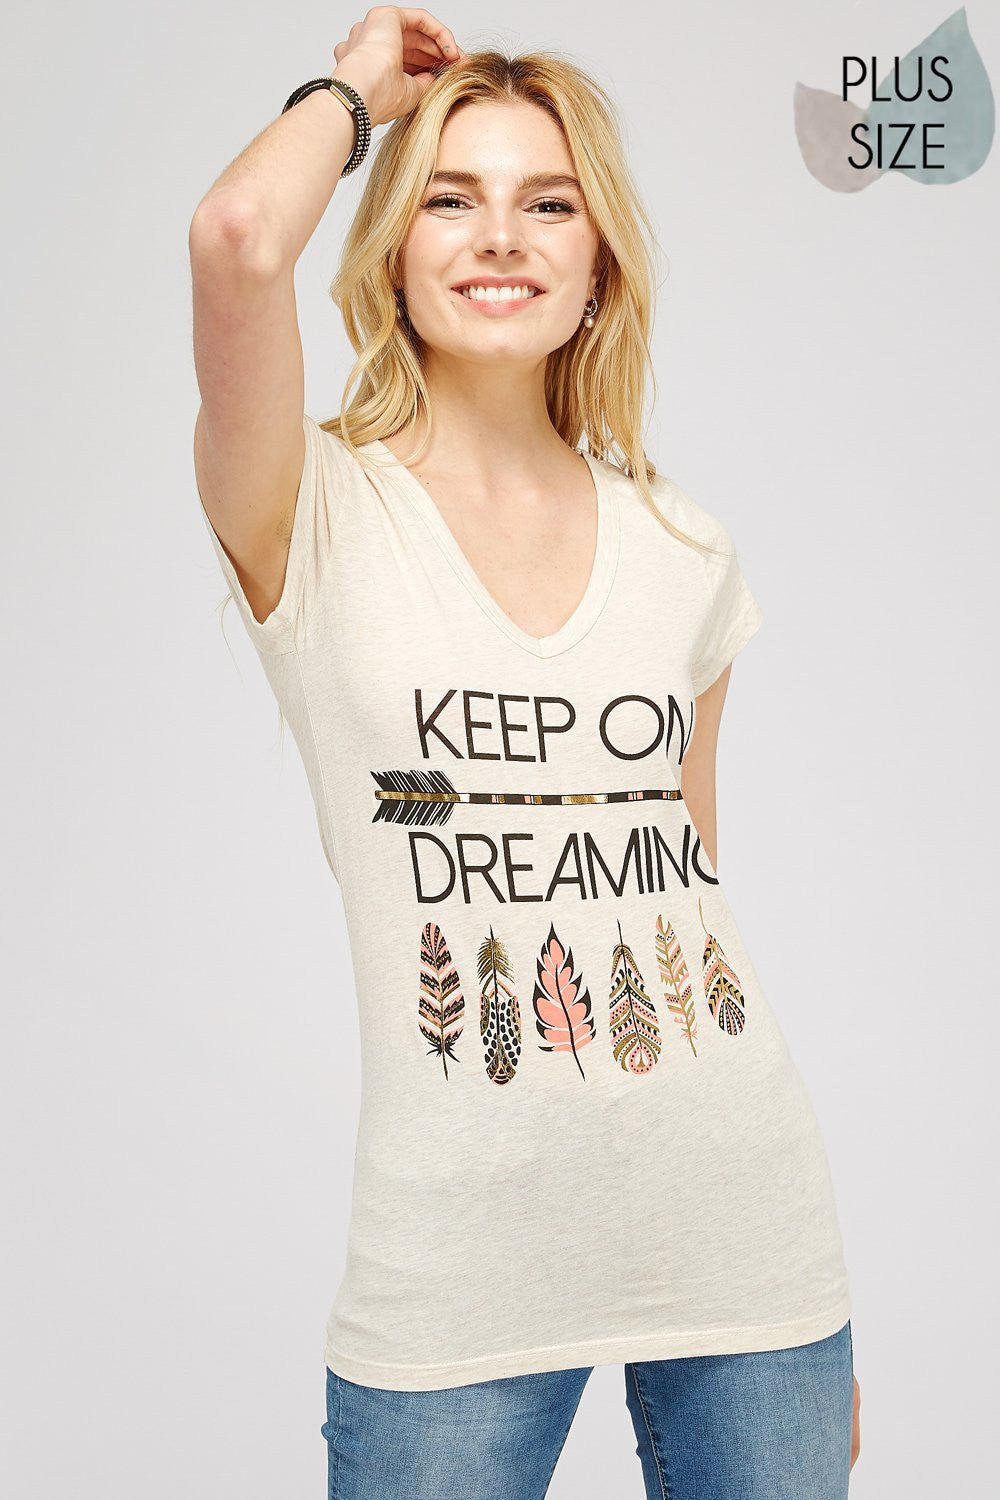 Beige V.neck tee "Keep On Dreaming" Perfect for Spring & Summer, Evening wear, Festival, Beach Day, Vacation, Dance, Poolside Parties